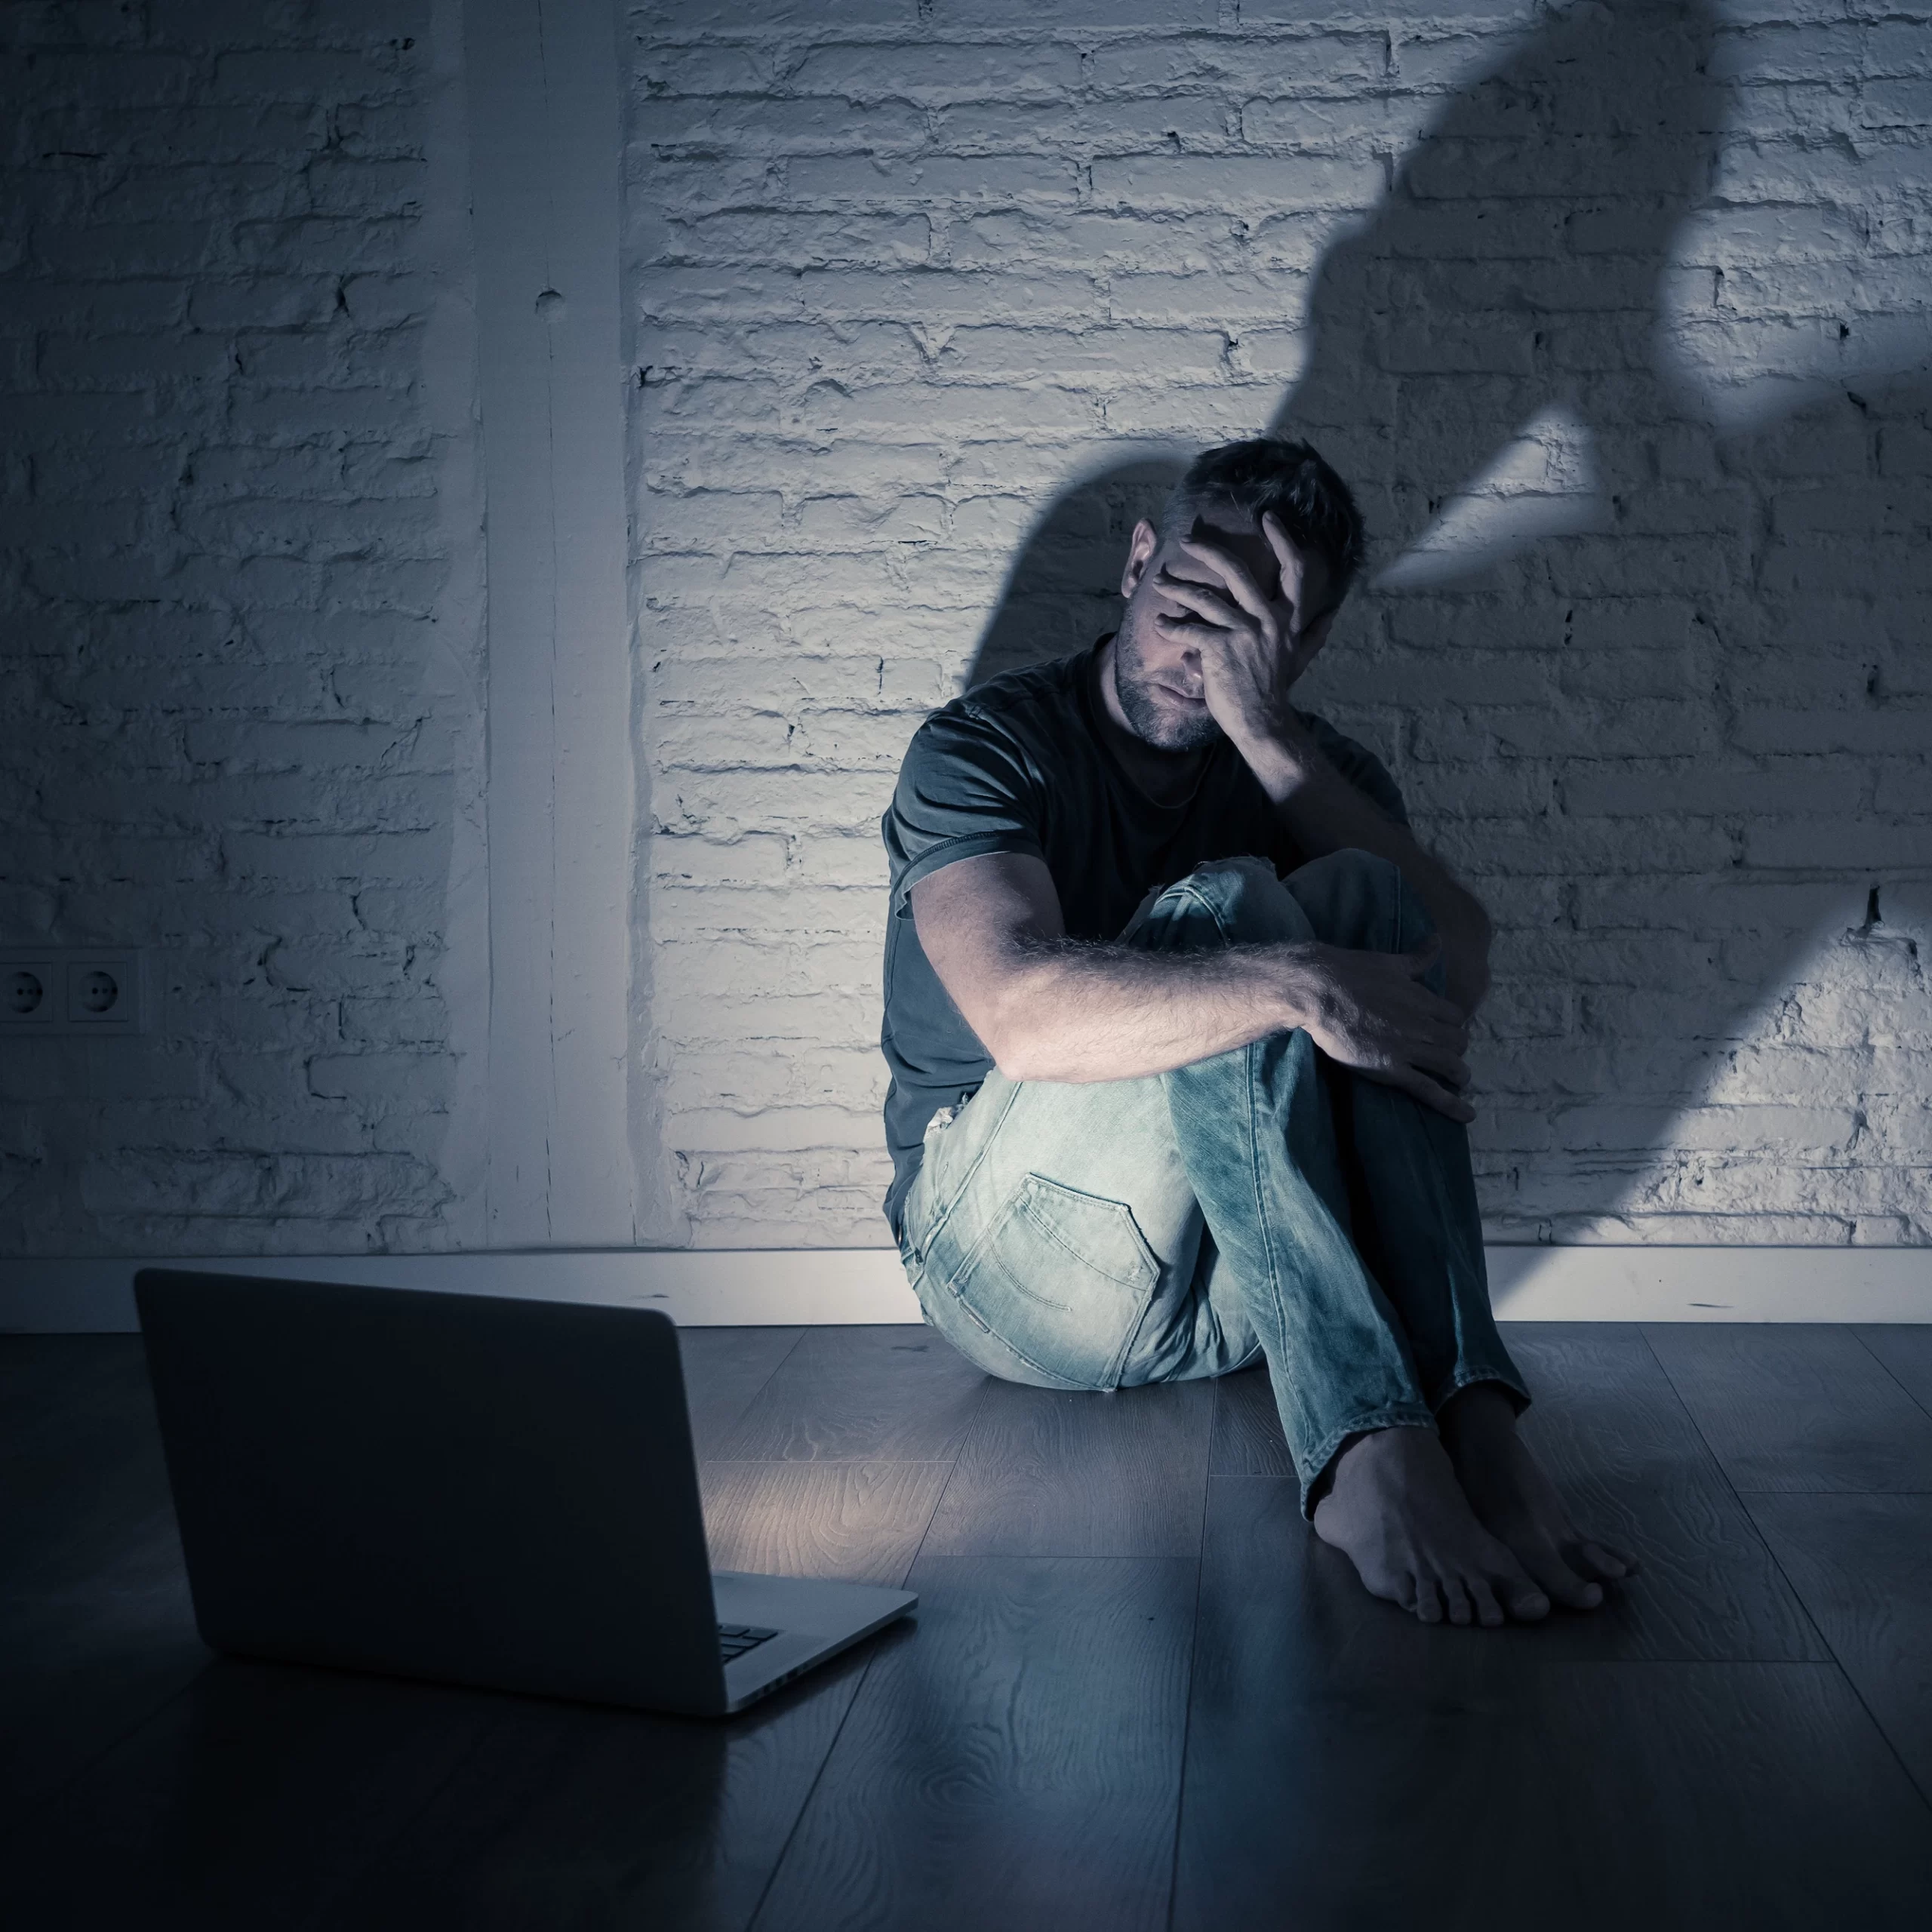 Scammers Prey on those with Mental Health Issues